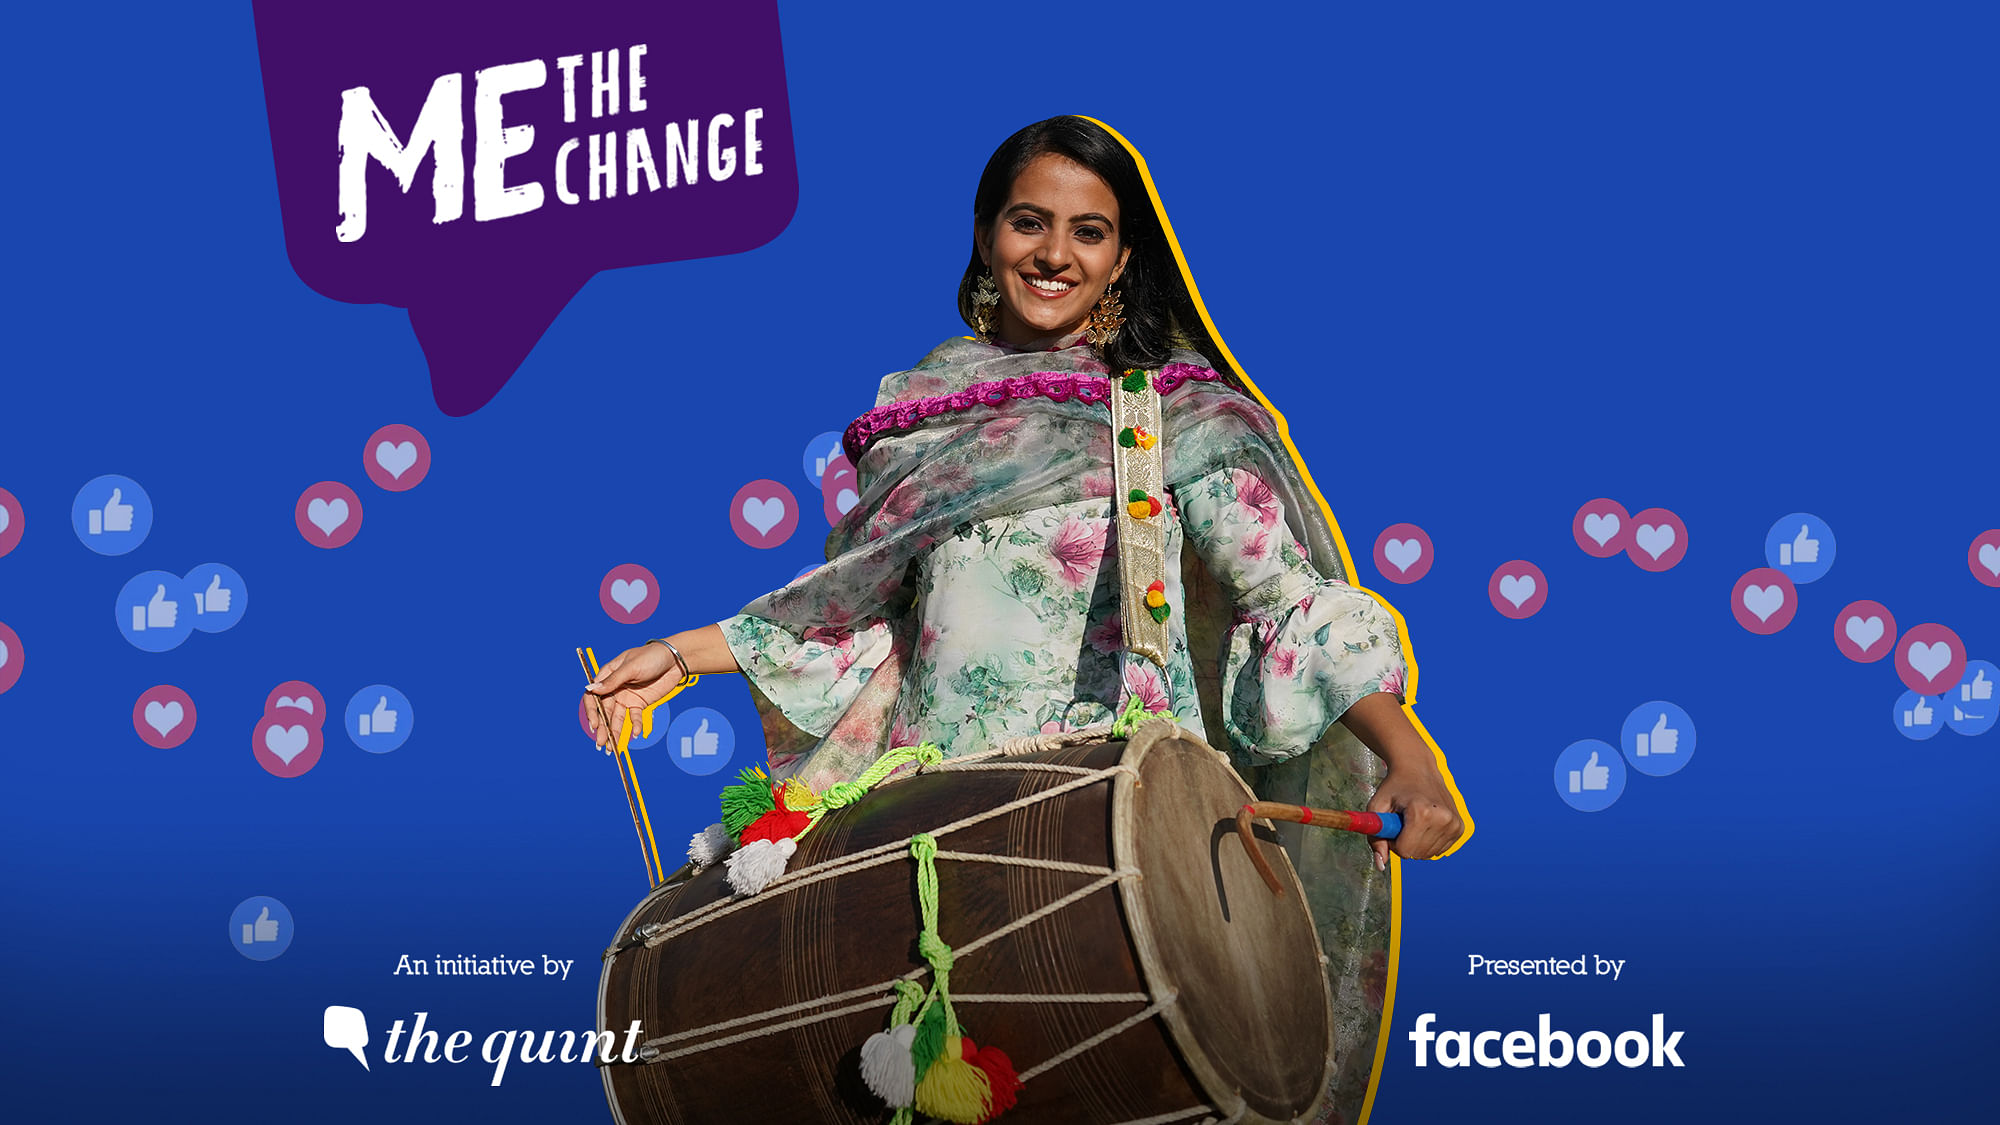 Jahan Geet Singh is India’s youngest female dhol player.